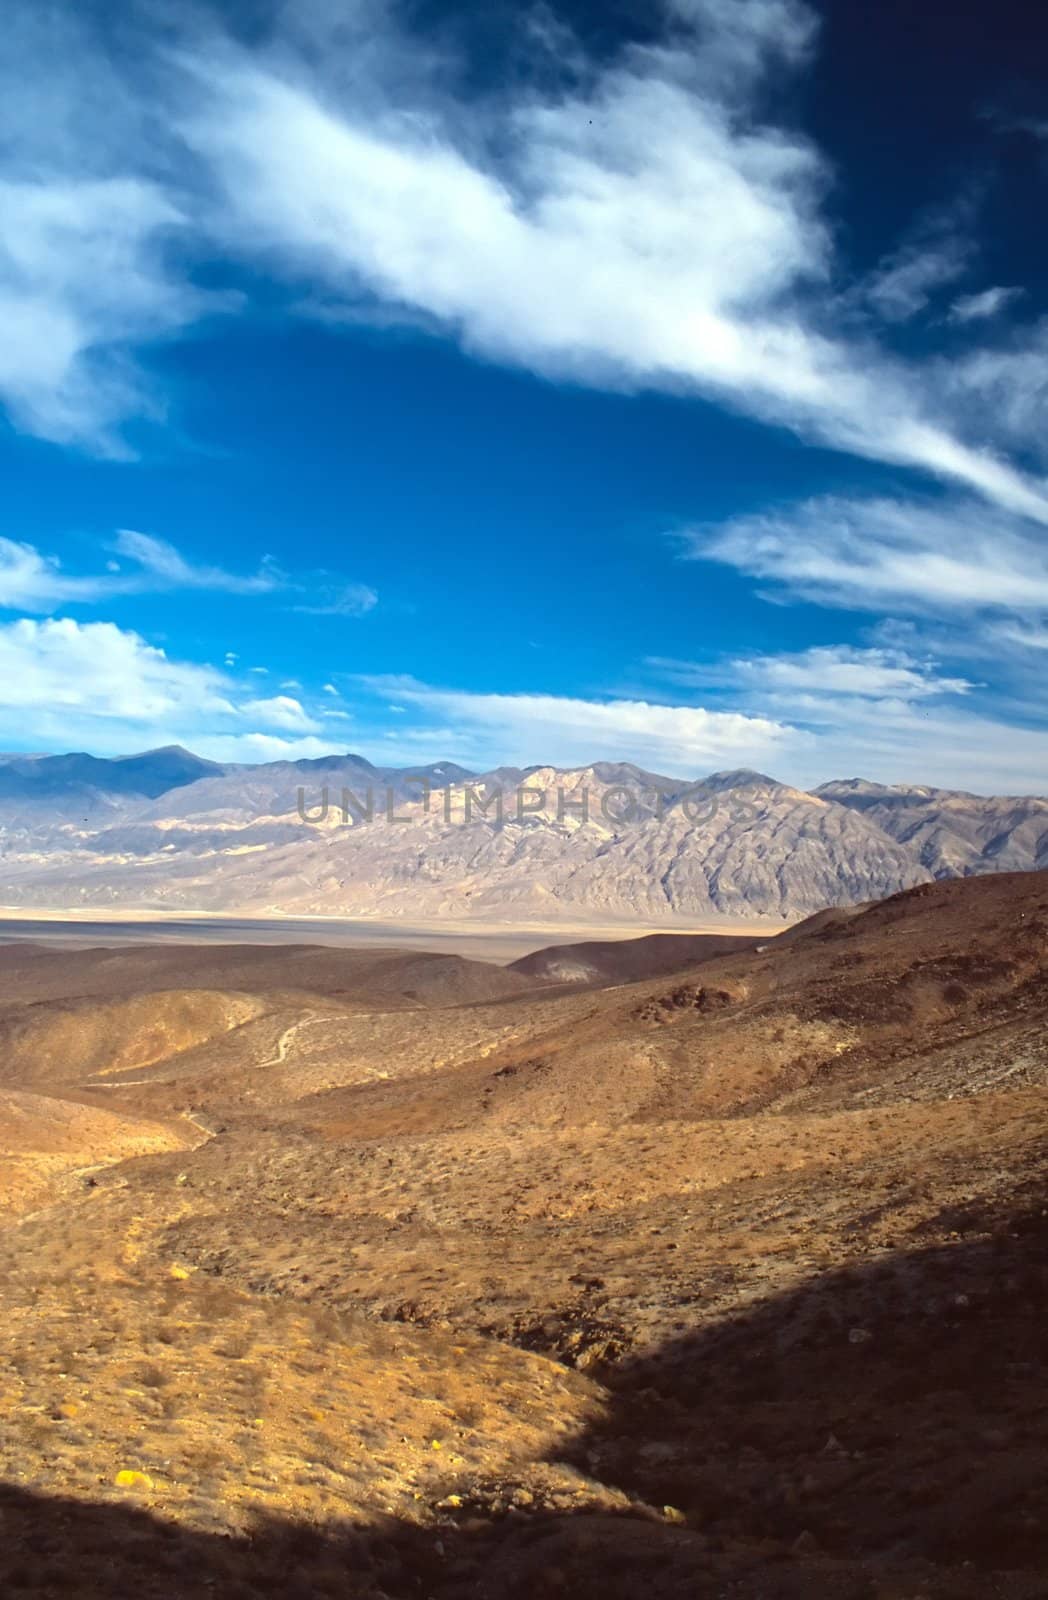 Death Valley is the lowest, driest and hottest valley in the United states. It is the location of the lowest elevation in North America